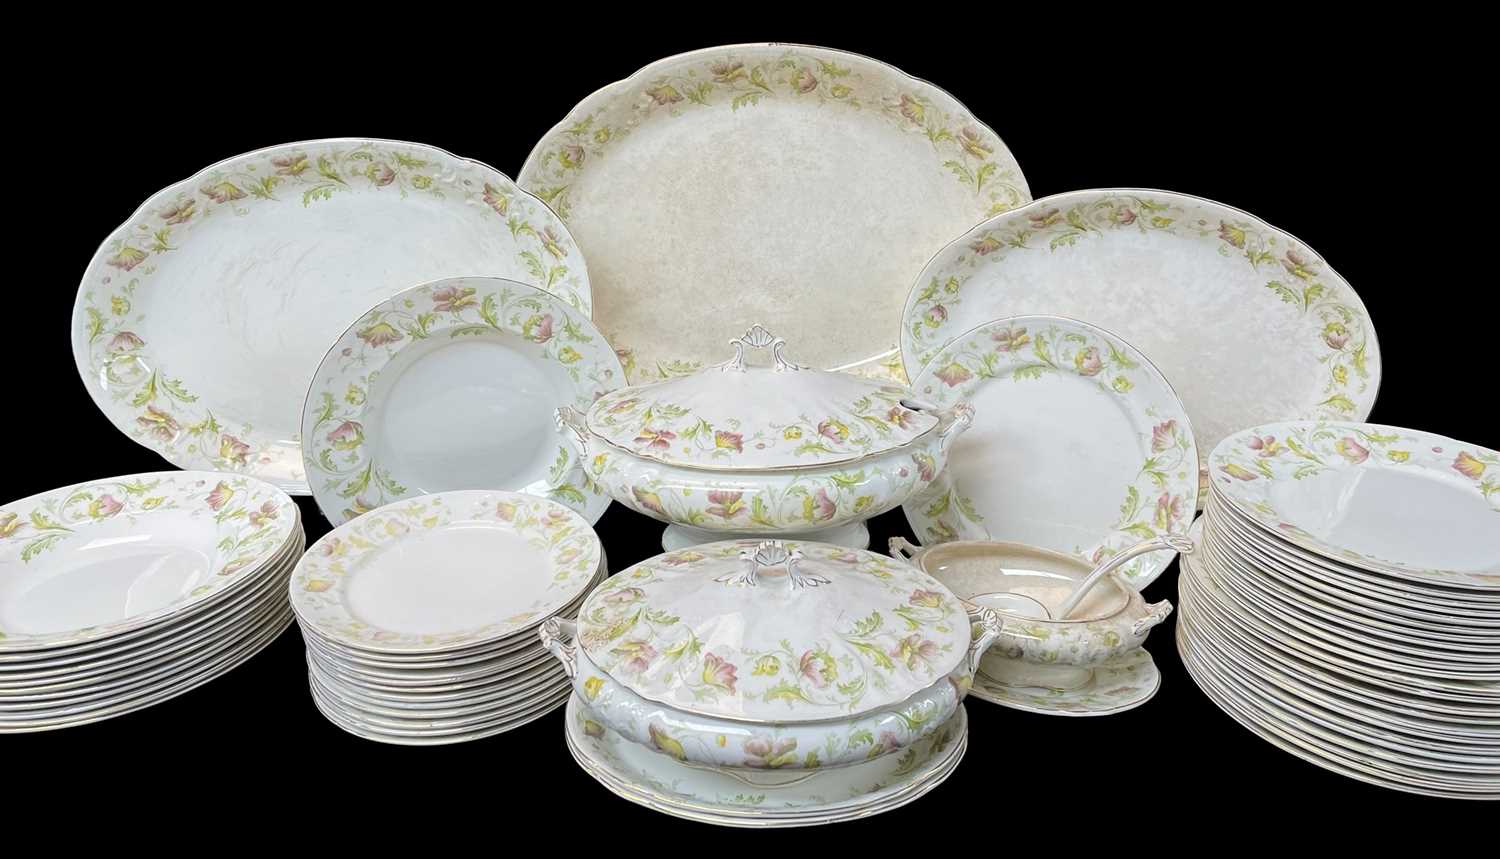 PARCEL EARLY 20TH CENTURY STAFFORDSHIRE DINNERWARE with floral gilt decoration, comprising platters,